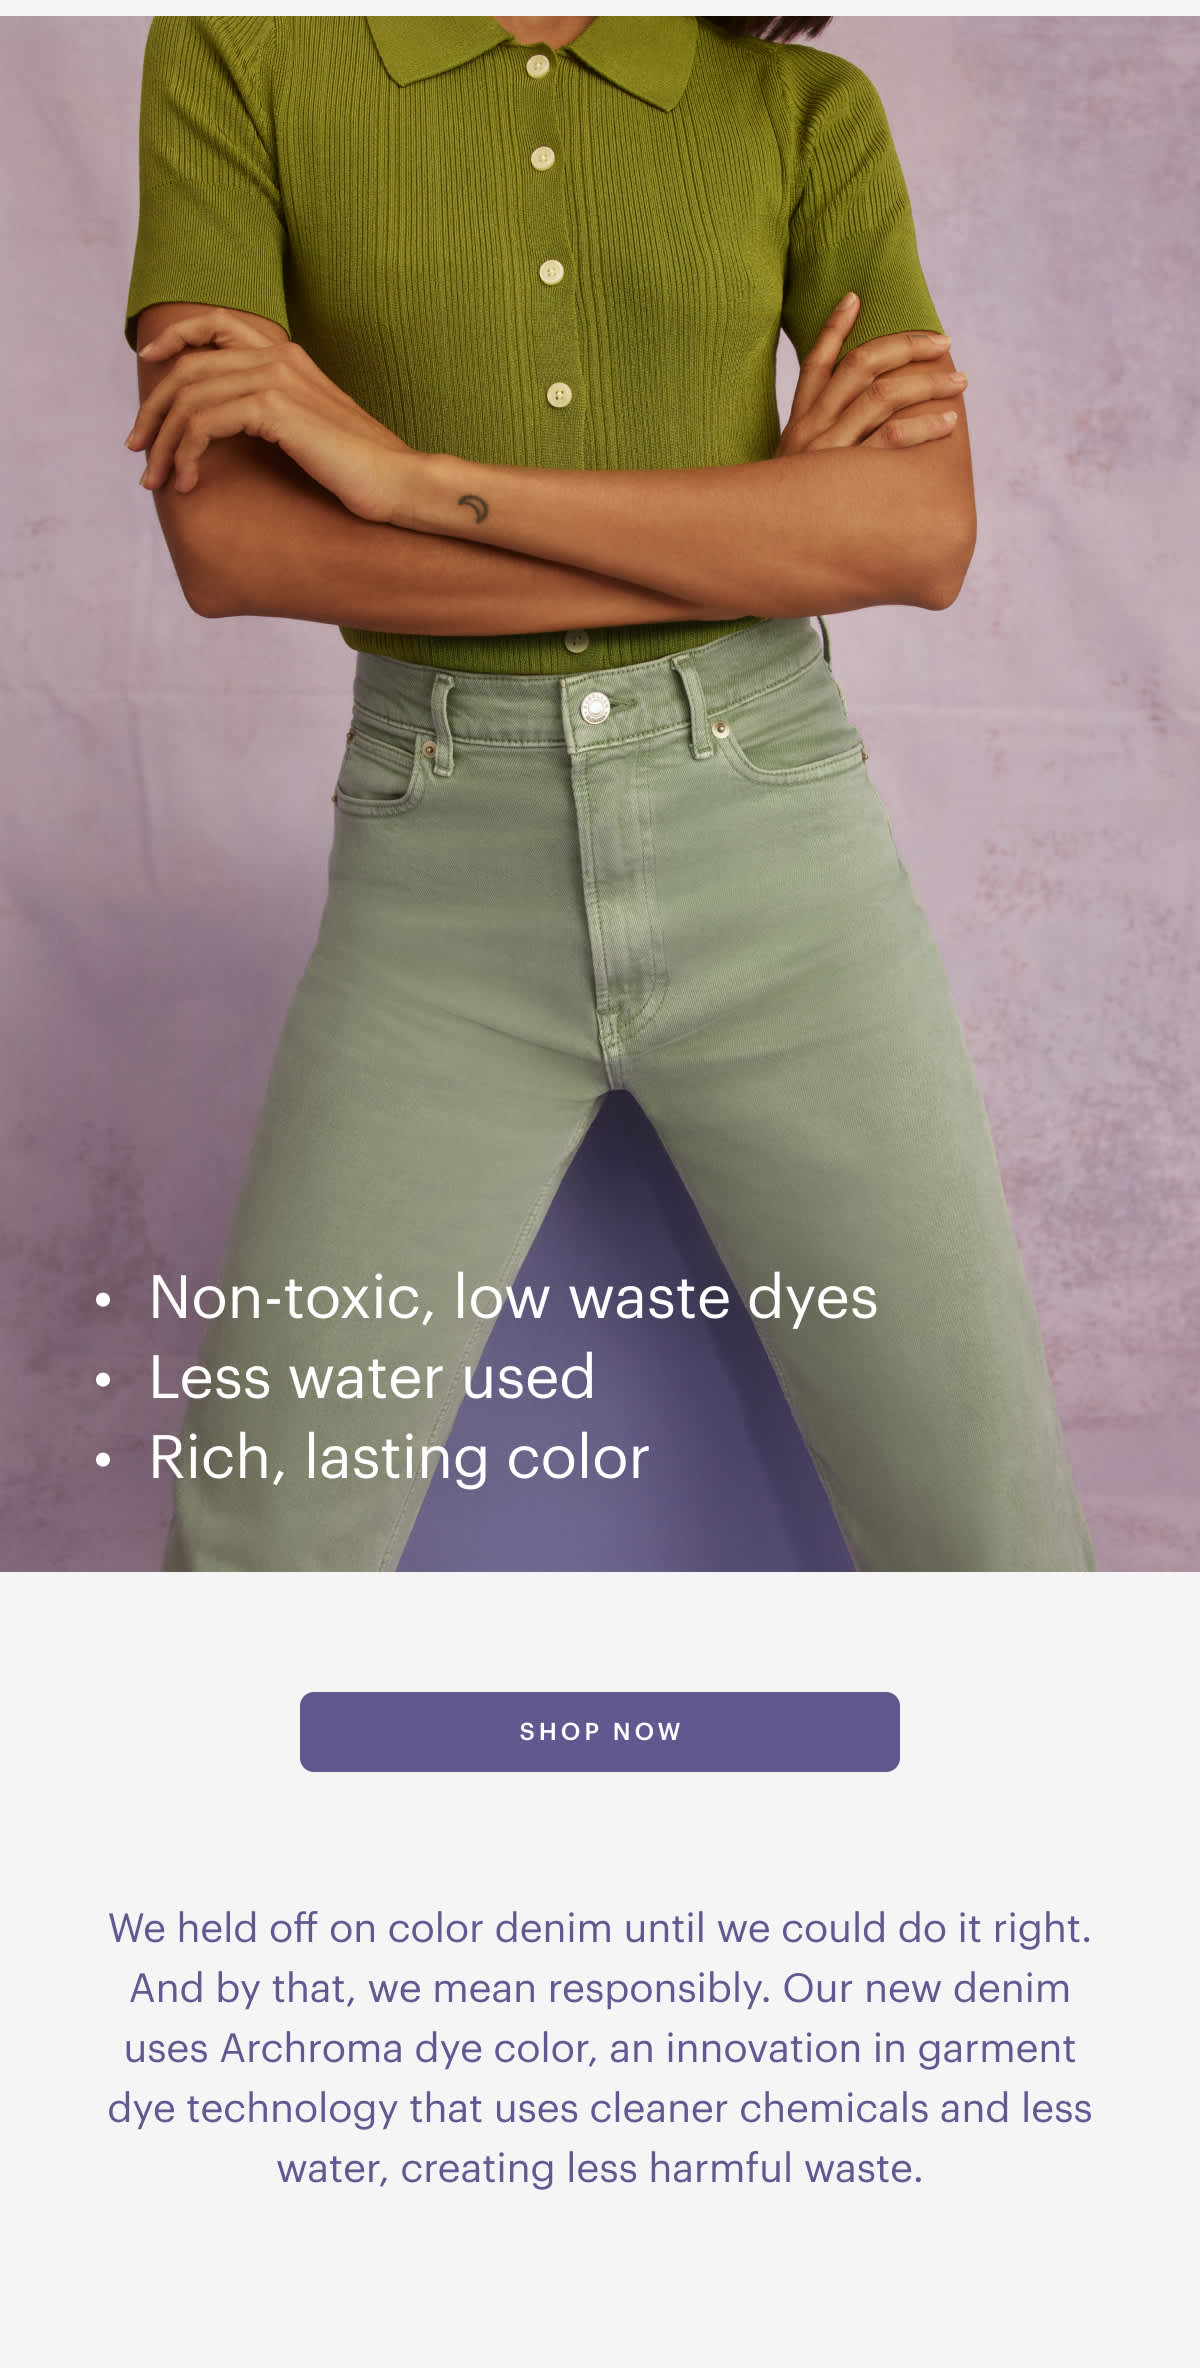  Non-toxic, low waste dyes - Less water used Rich, lasting color SHOP NOW We held off on color denim until we could do it right. And by that, we mean responsibly. Our new denim uses Archroma dye color, an innovation in garment dye technology that uses cleaner chemicals and less water, creating less harmful waste. 